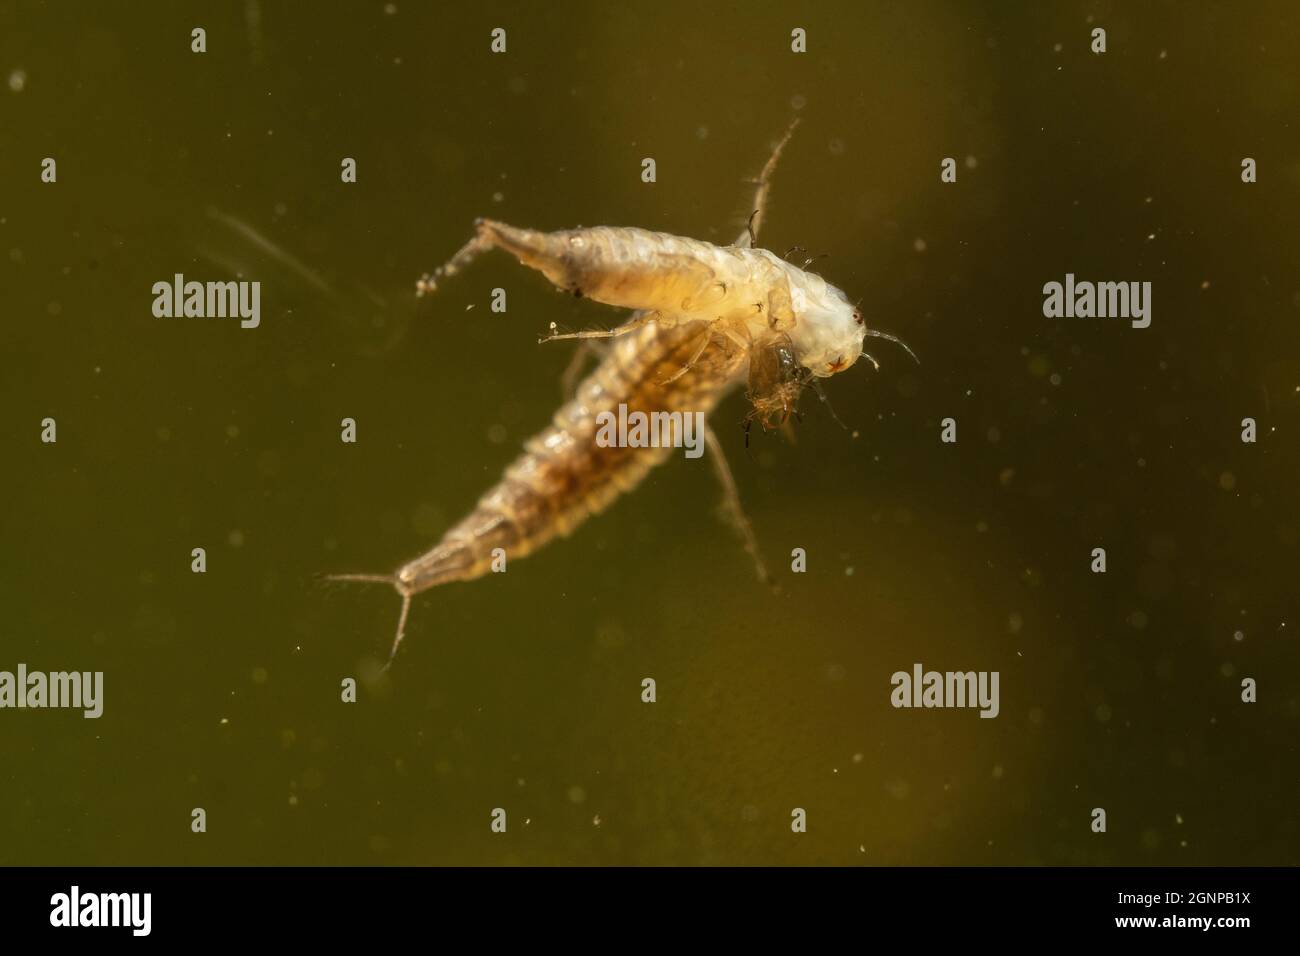 Great diving beetle (Dytiscus marginalis), larva feeds conspecific after skinning, Germany, Bavaria Stock Photo